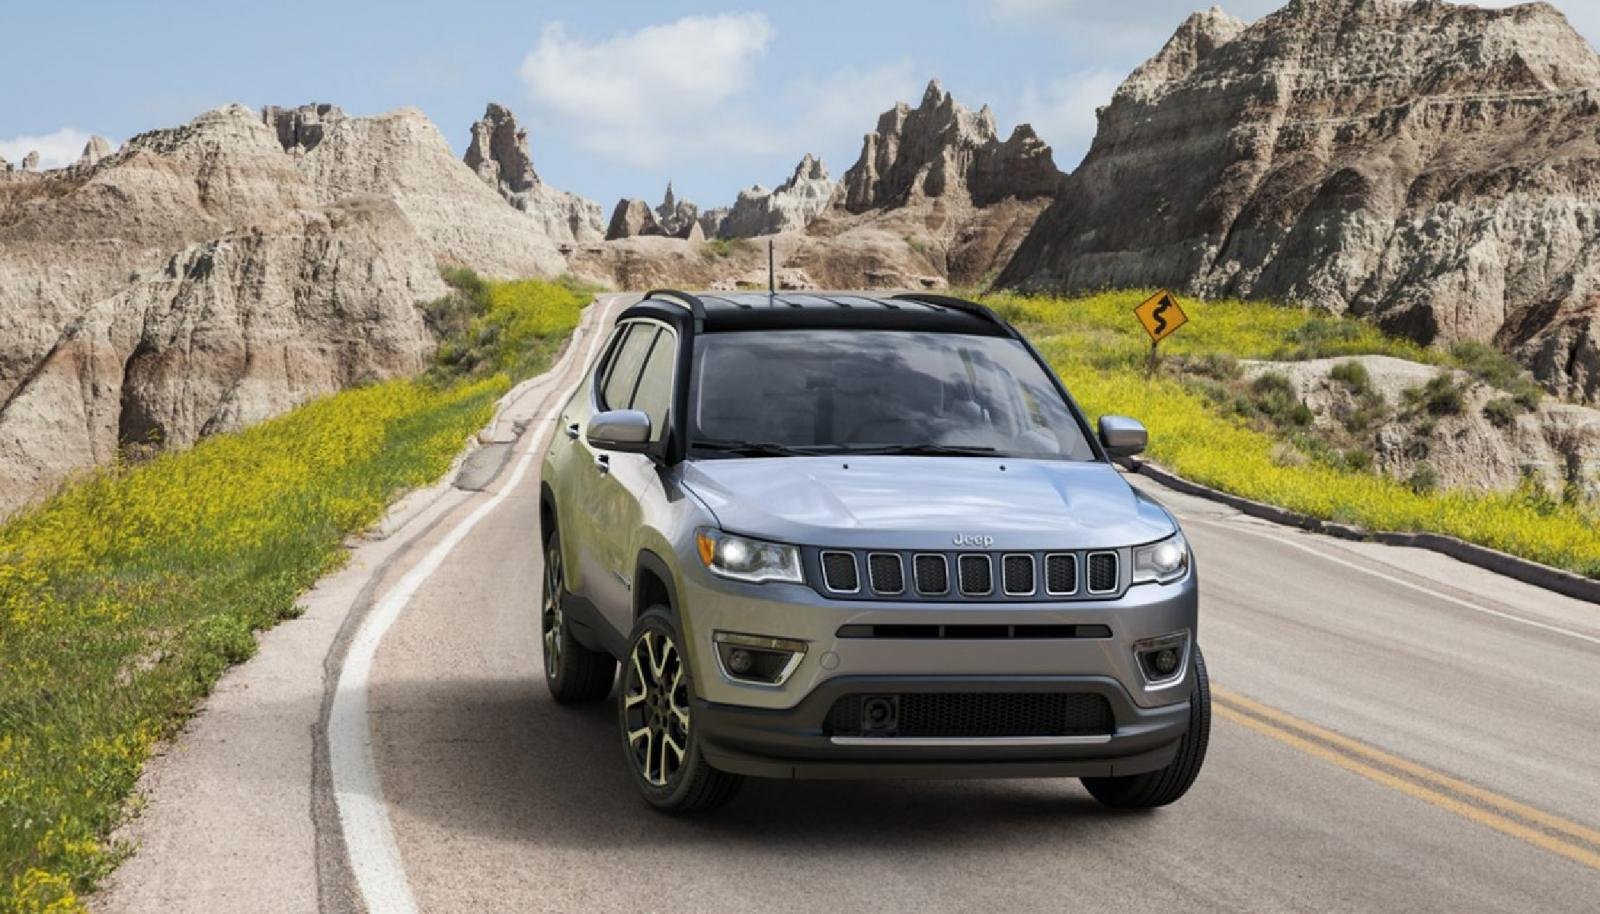 Jeep Compass sales February 2020